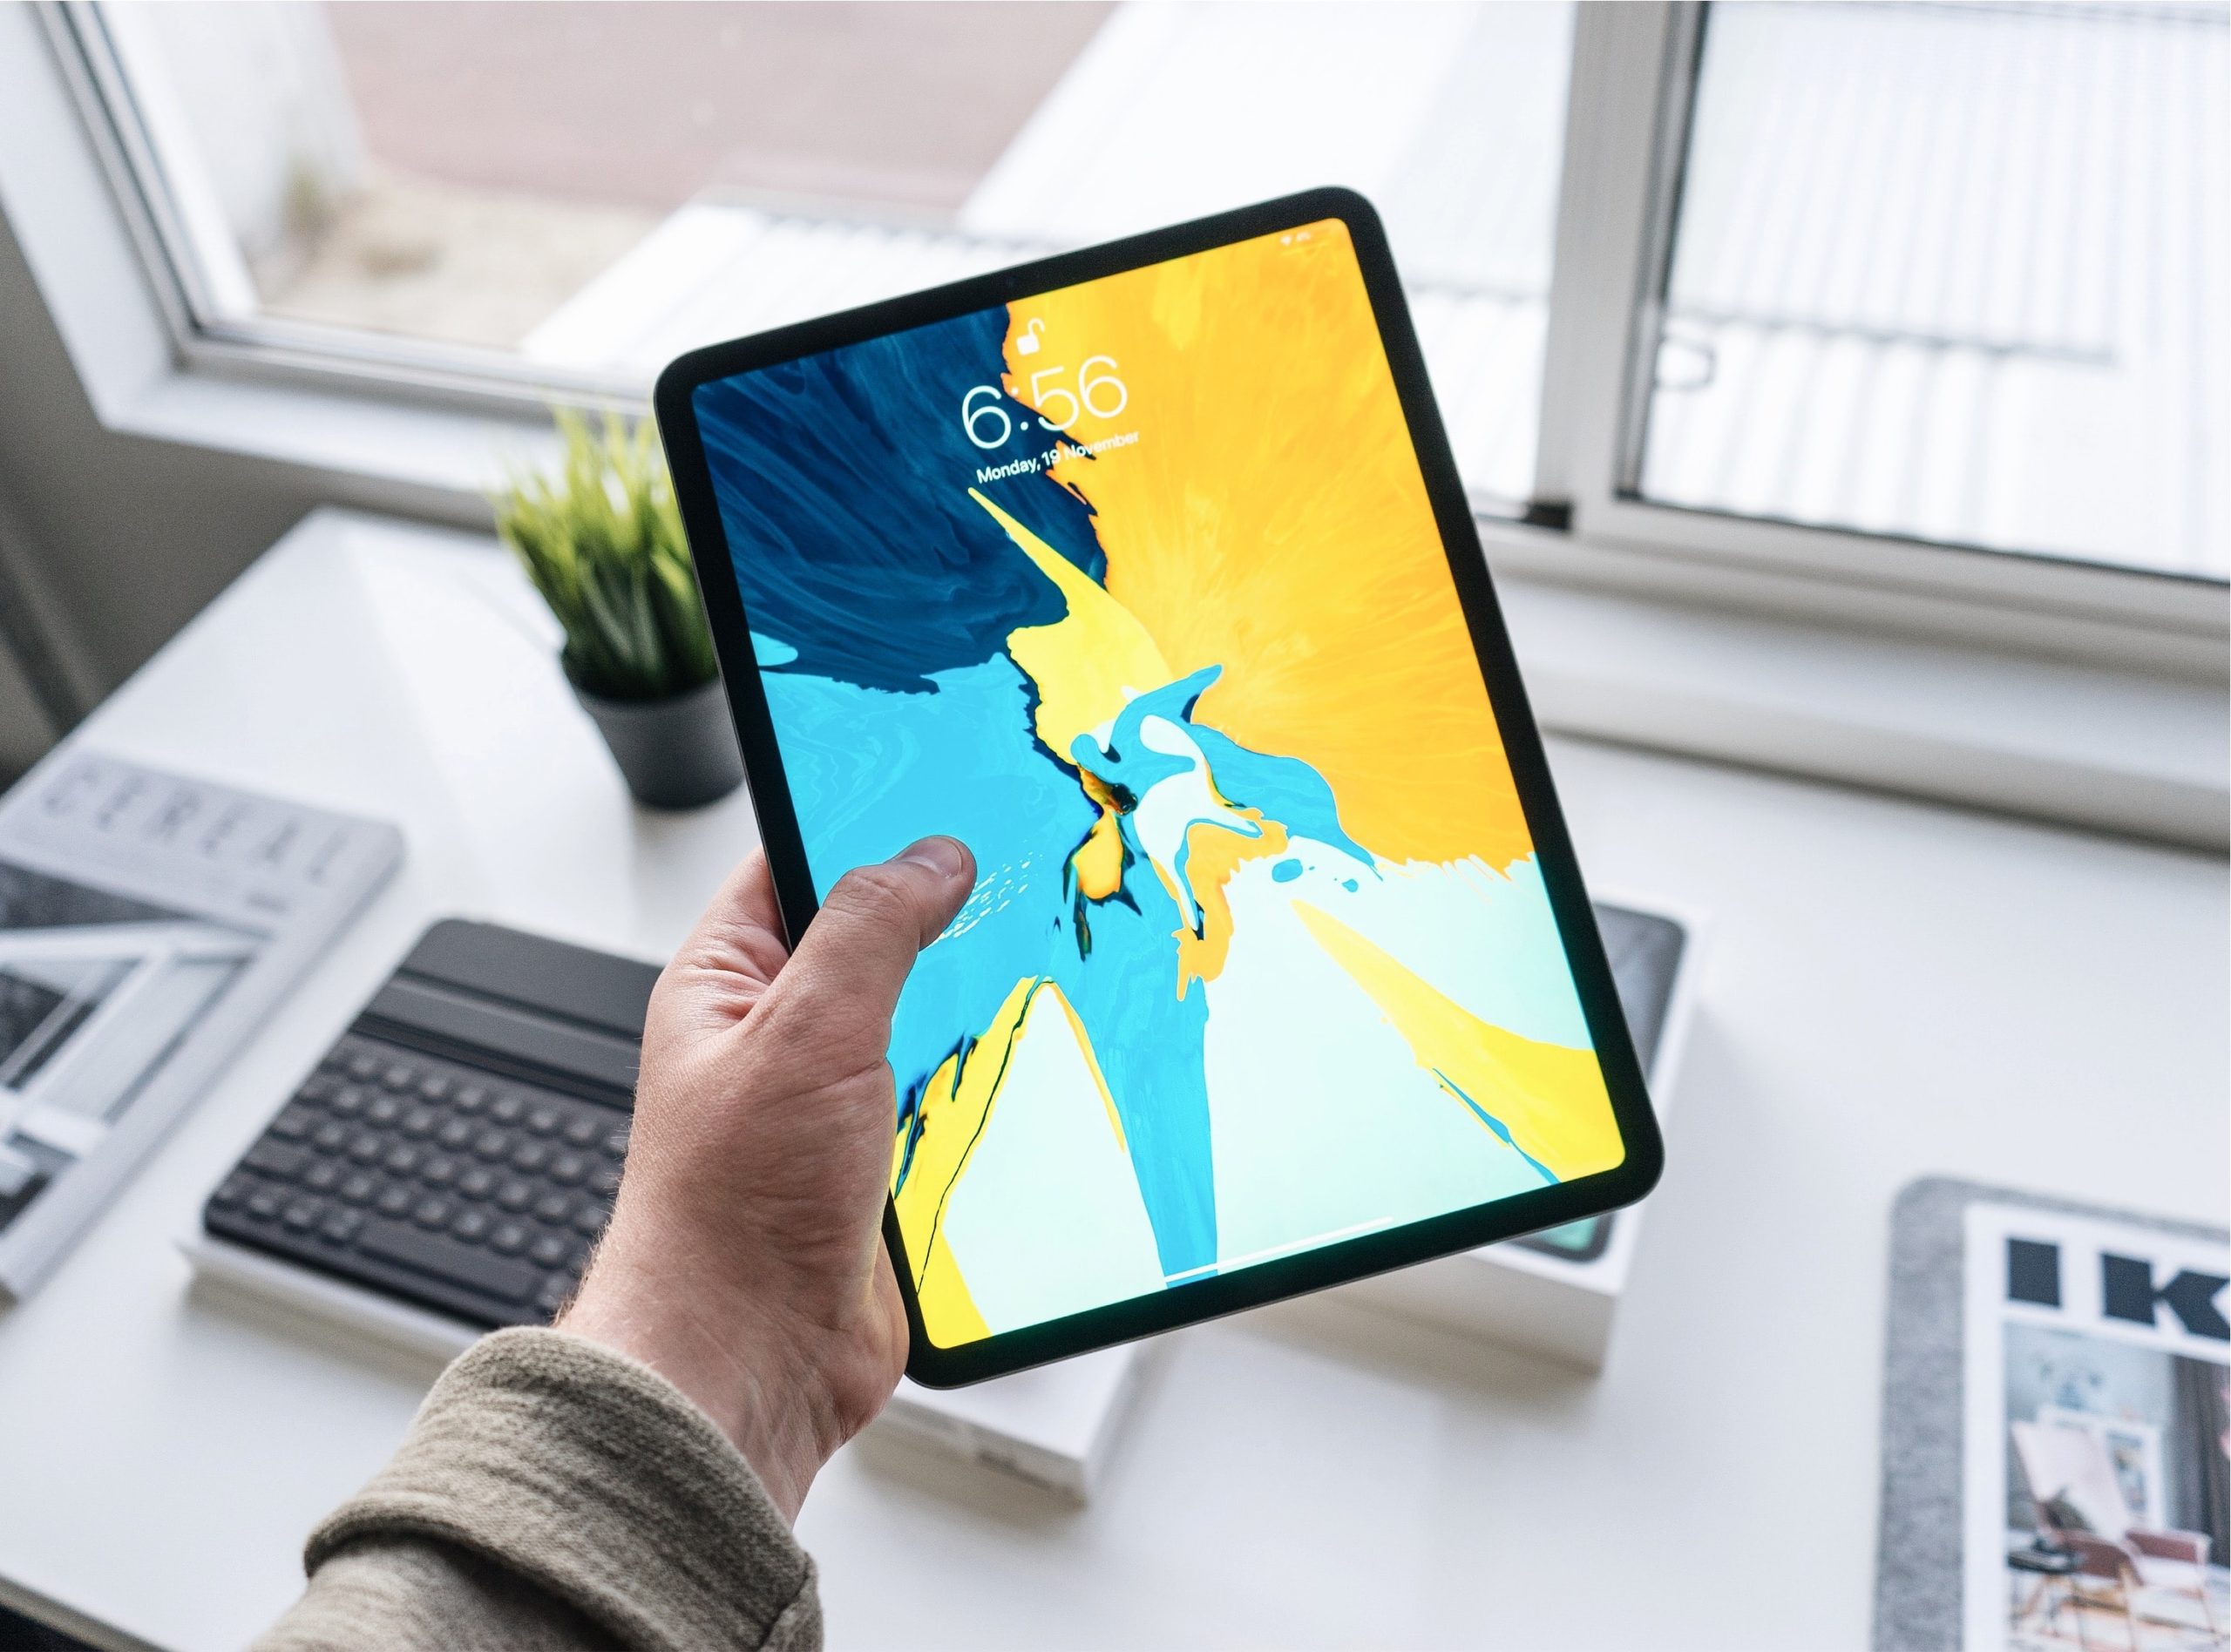 Apple iPad’s market share grows in the first quarter of 2021